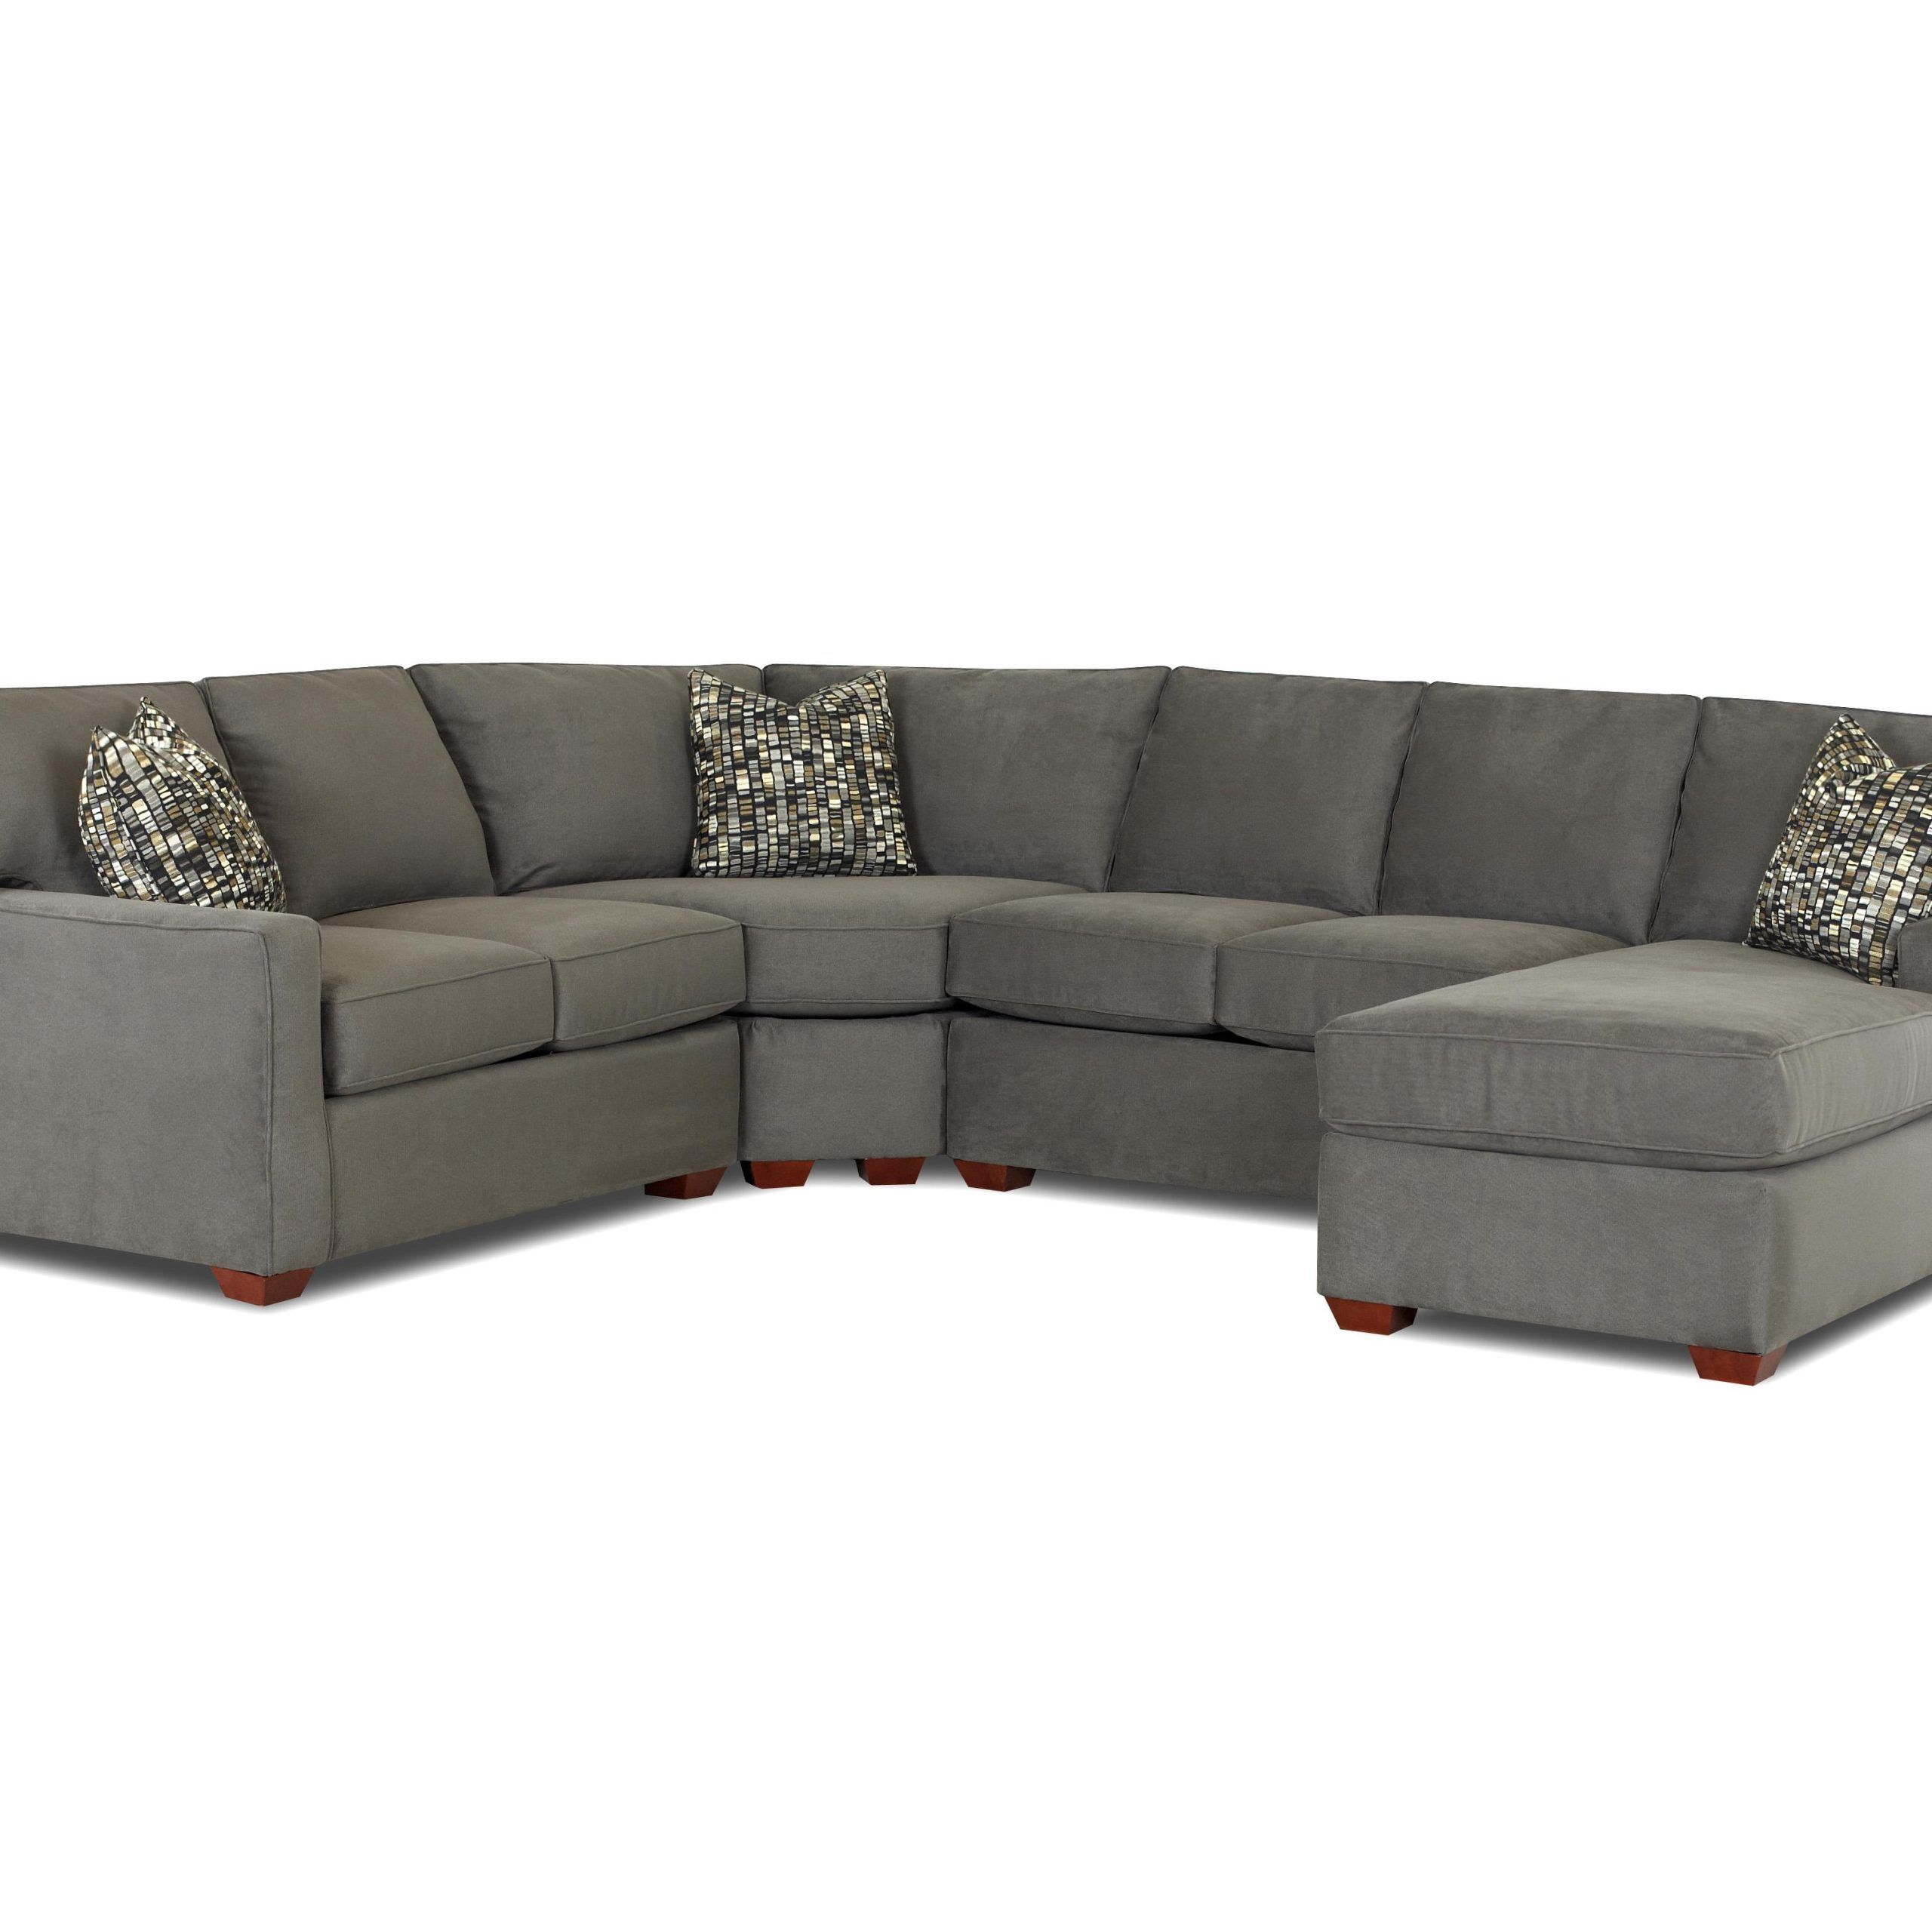 Contemporary L Shaped Sectional Sofa With Left Arm Facing Chaise Pertaining To Most Recently Released Modern L Shaped Sofa Sectionals (View 9 of 15)